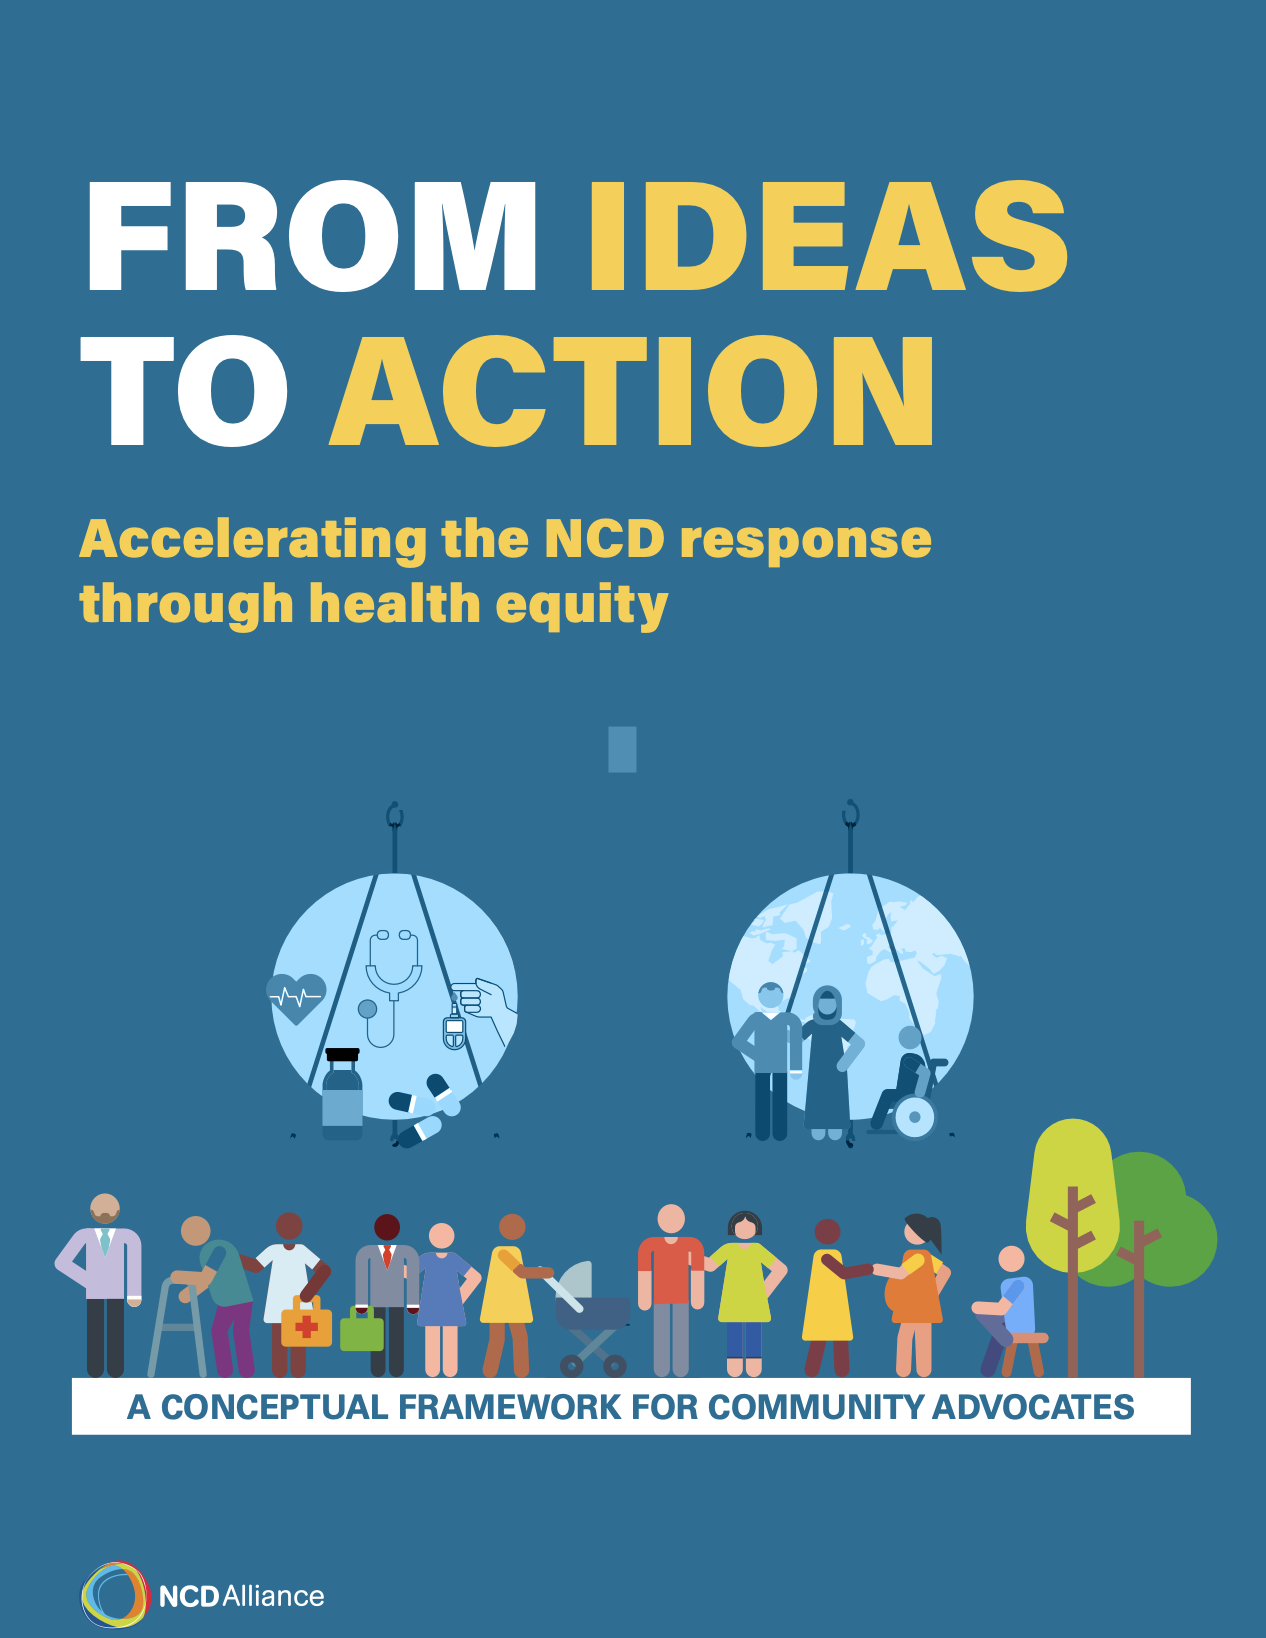 FROM IDEAS TO ACTION: Accelerating the NCD response through health equity